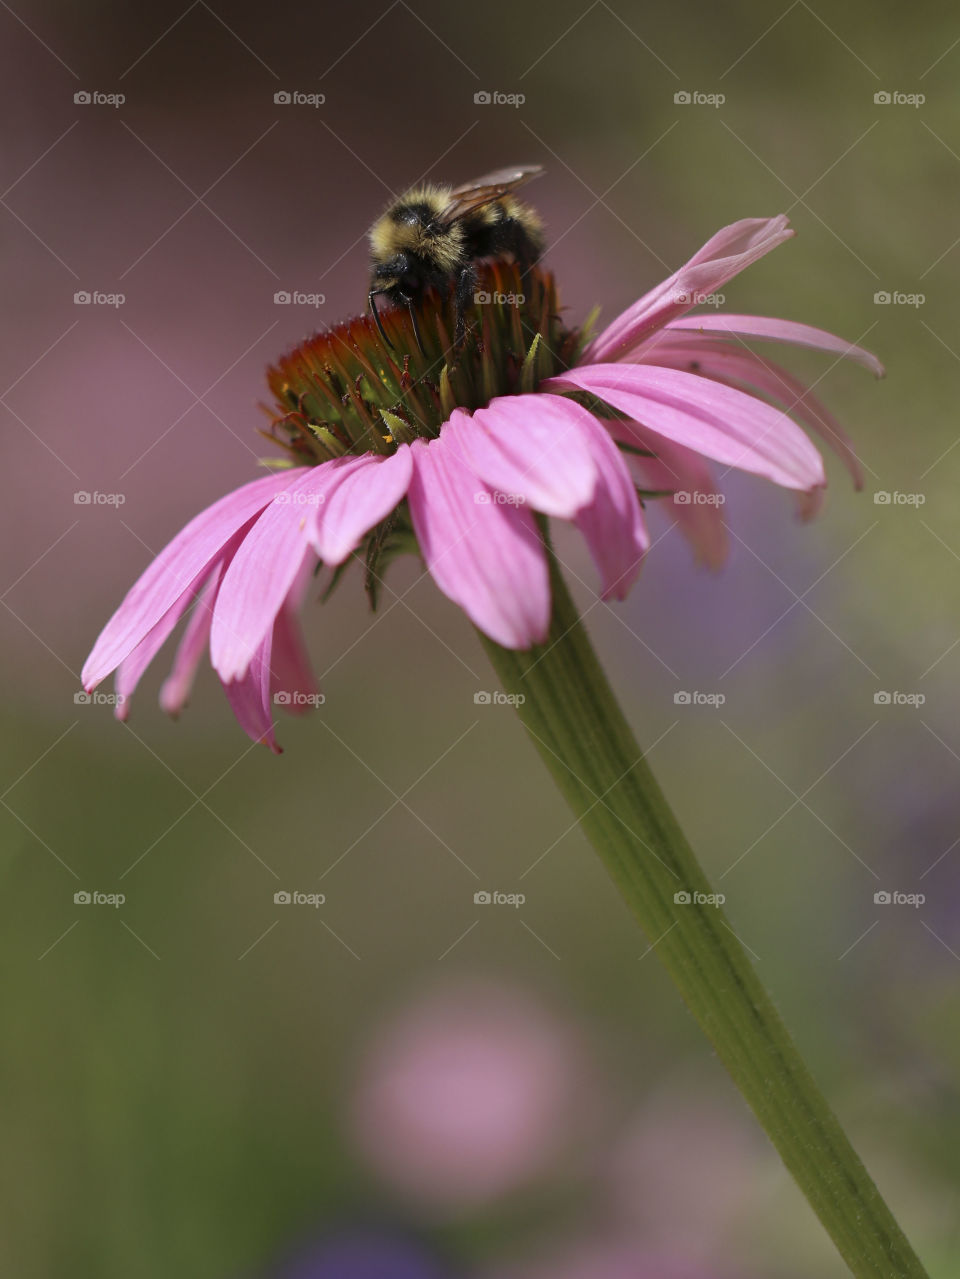 A bumble bee on a flower in Montana